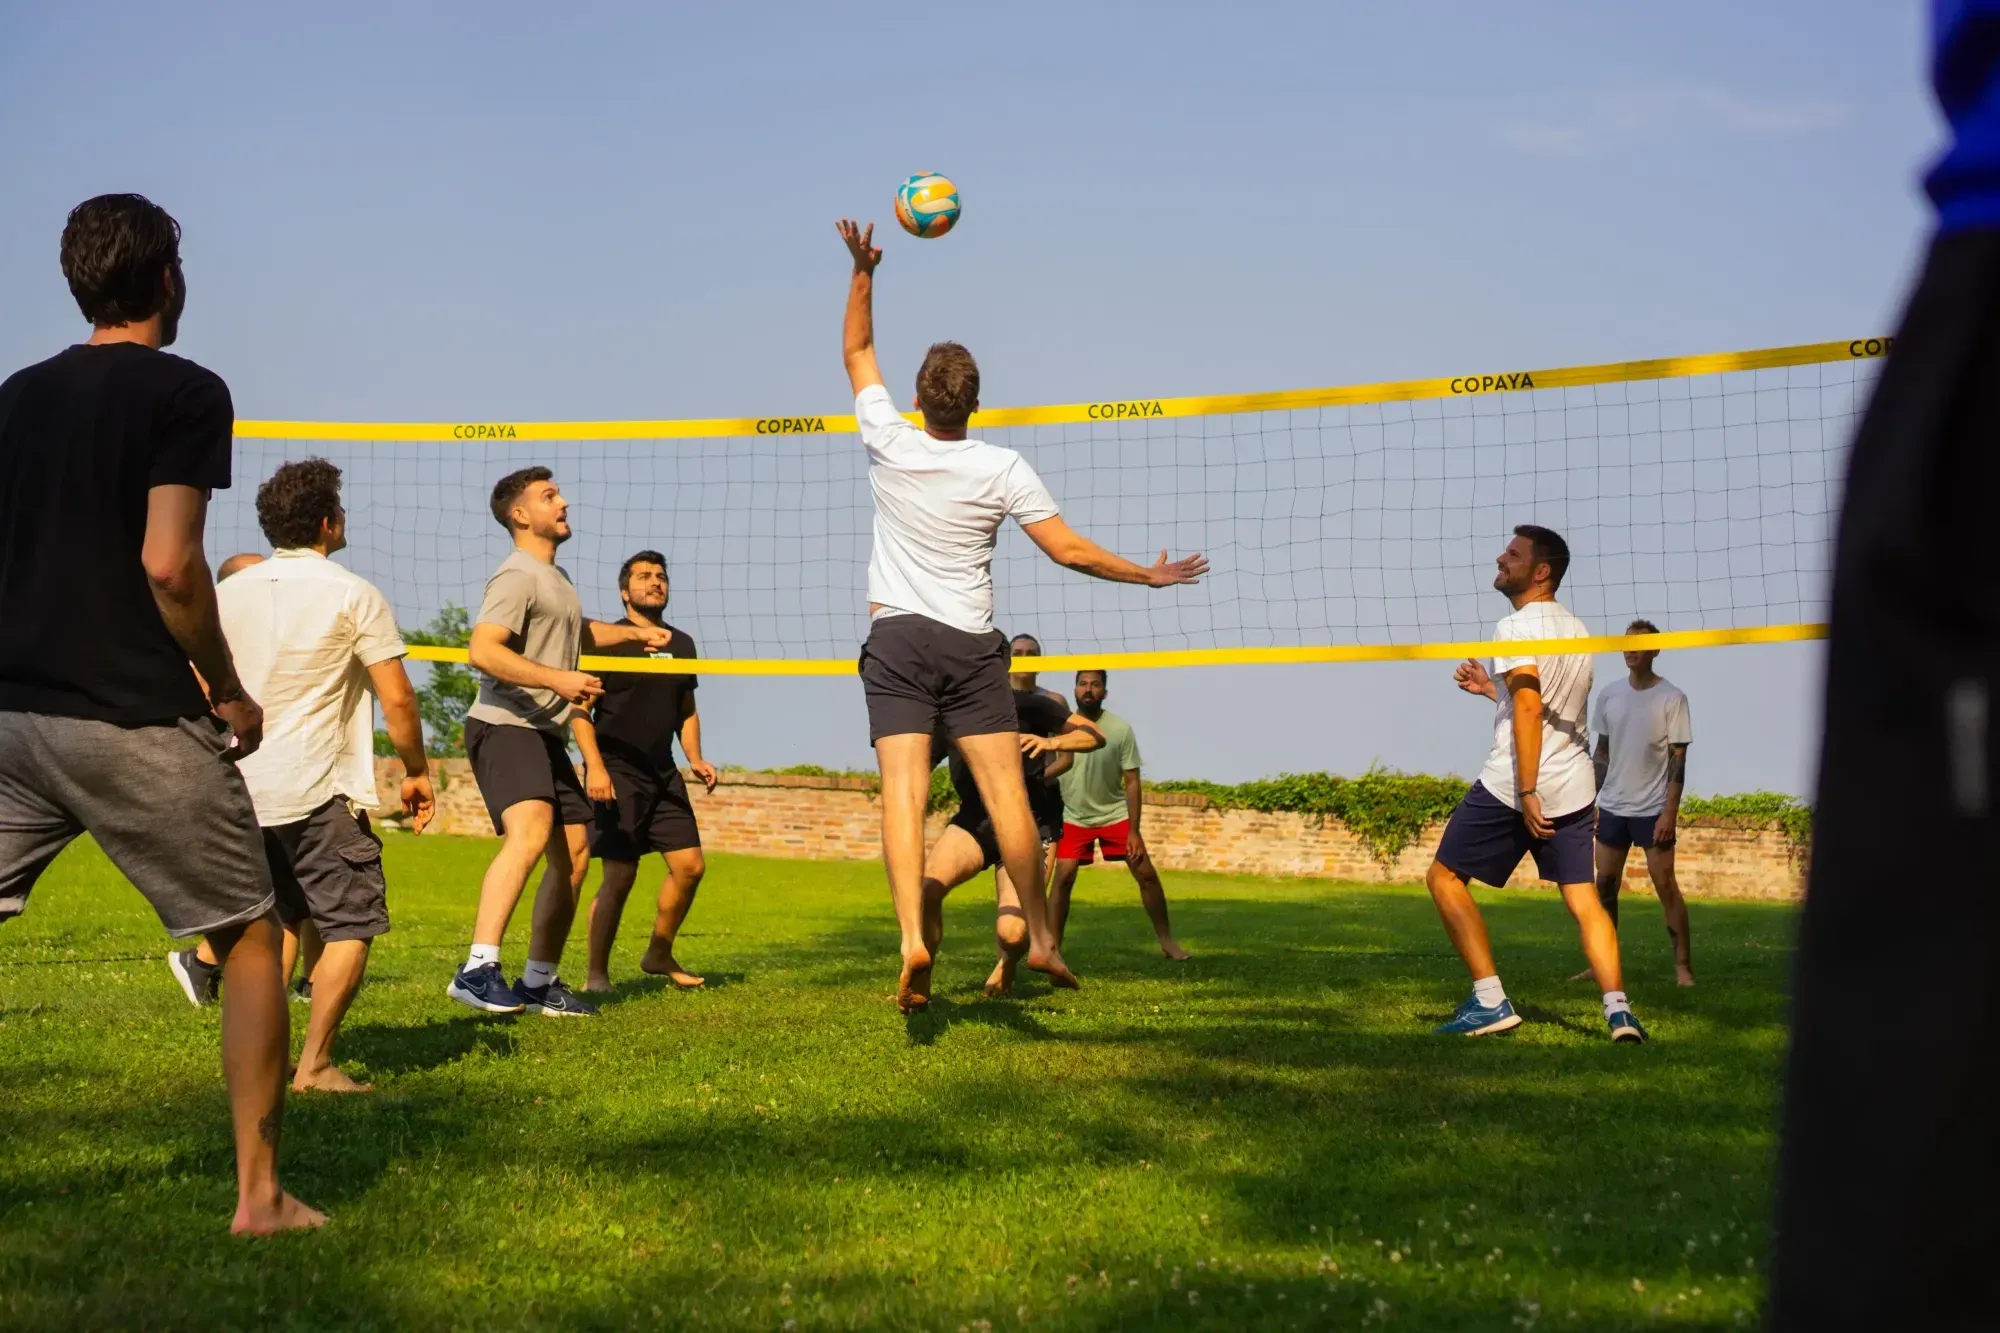 Two groups of men playing volleyball. One man is jumping and hitting the ball right over the net. They are all wearing shorts and t-shirts, standing on grass in the sun.